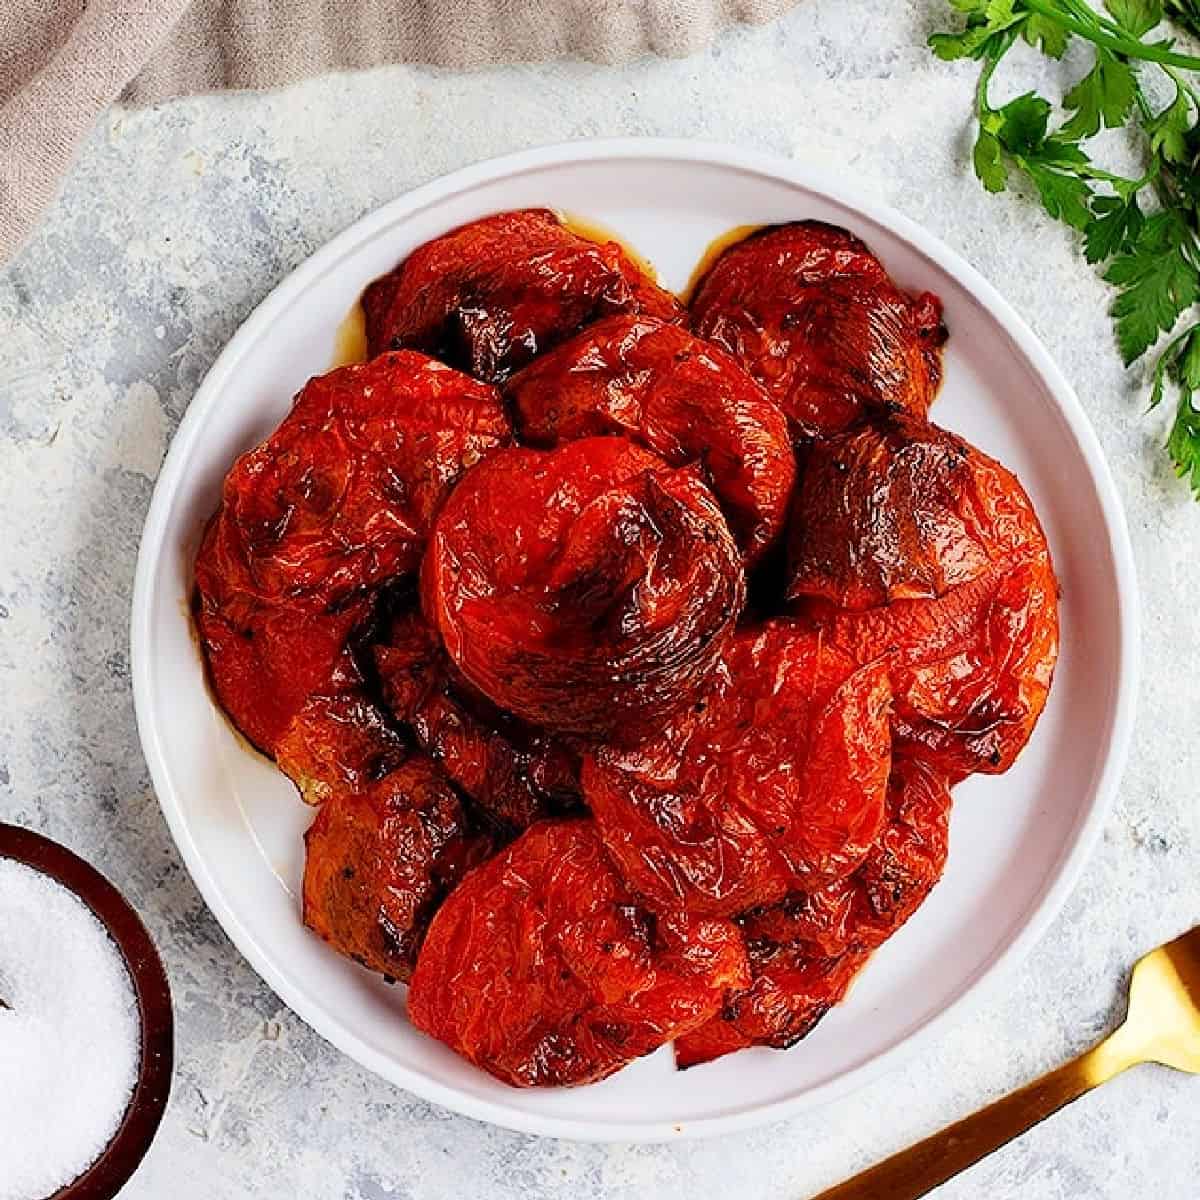 Easy Oven Roasted Tomatoes Recipe (Video) • Unicorns in the Kitchen